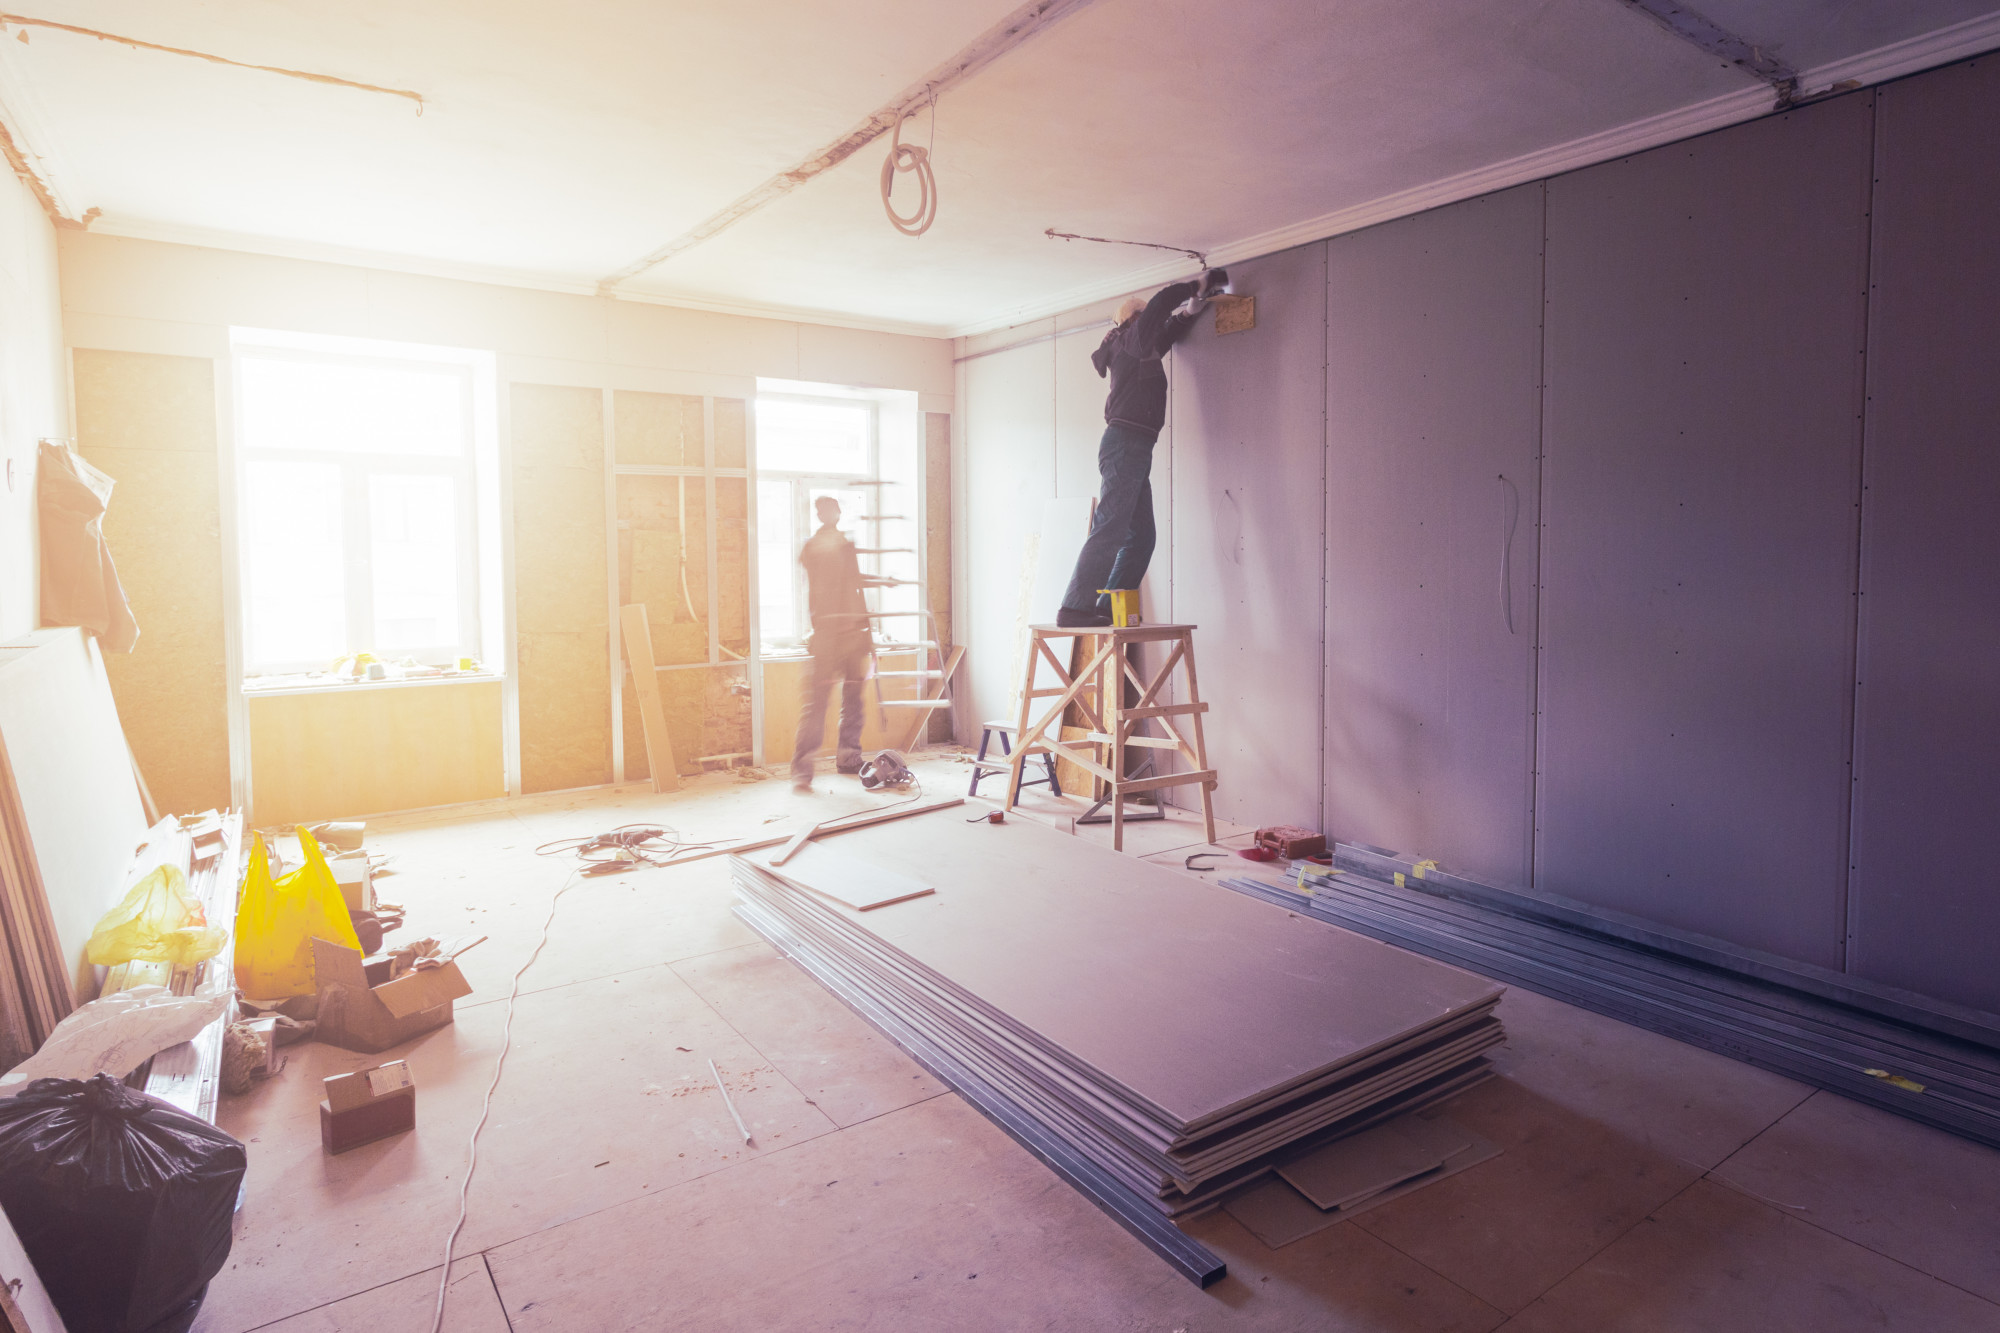 If you're looking to improve your home's value, there are a few home upgrades to consider. Here's what you need to know.